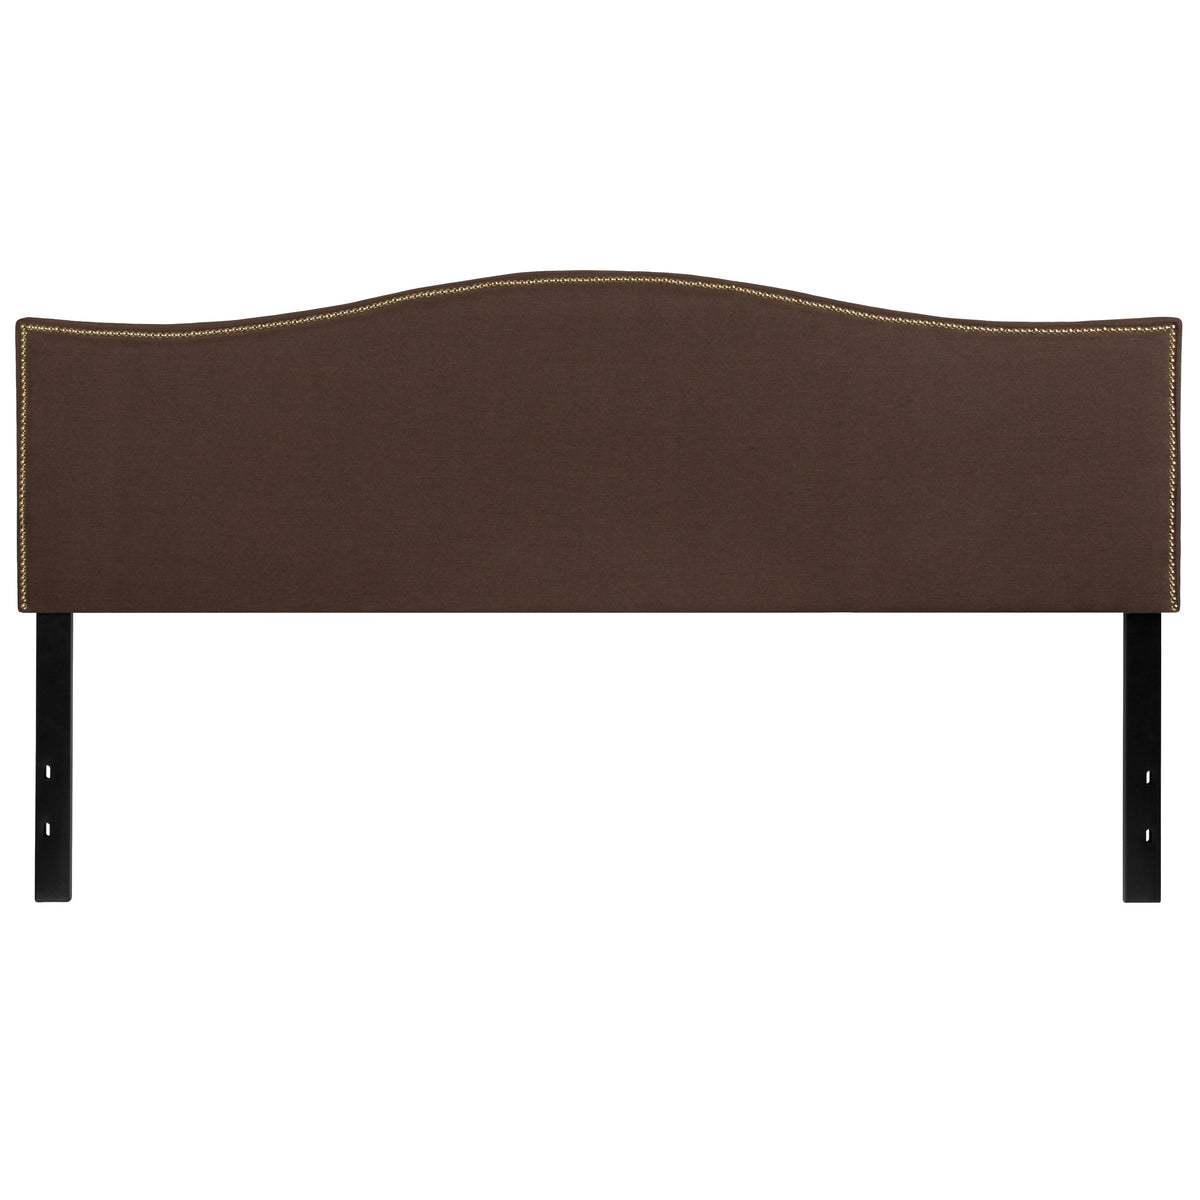 Dark Brown,King |#| Upholstered King Size Arched Headboard with Accent Nail Trim in Dk Brown Fabric